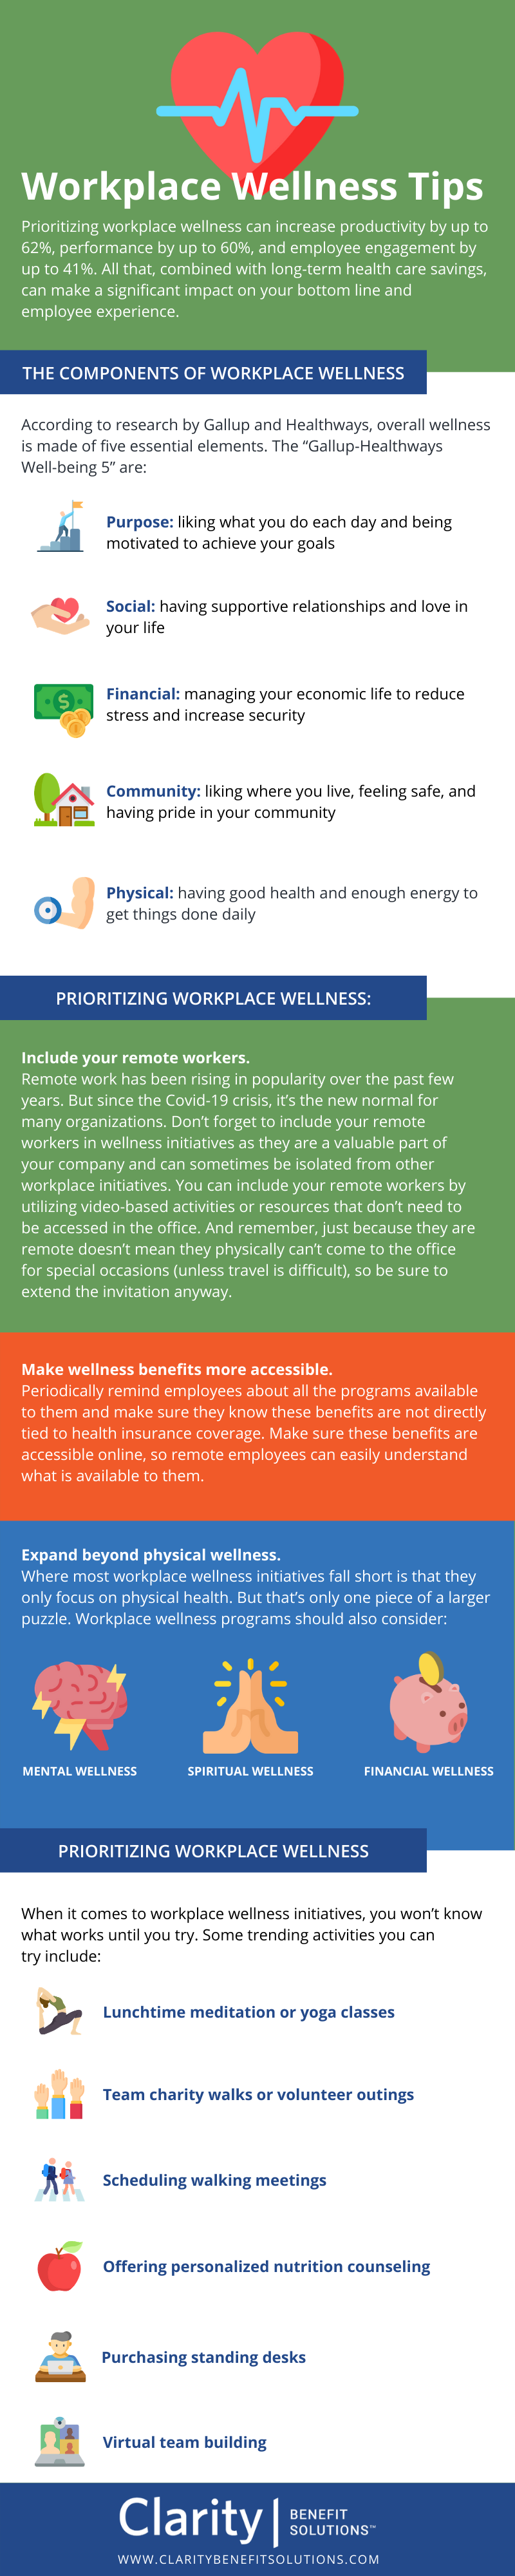 Workplace wellness infographic